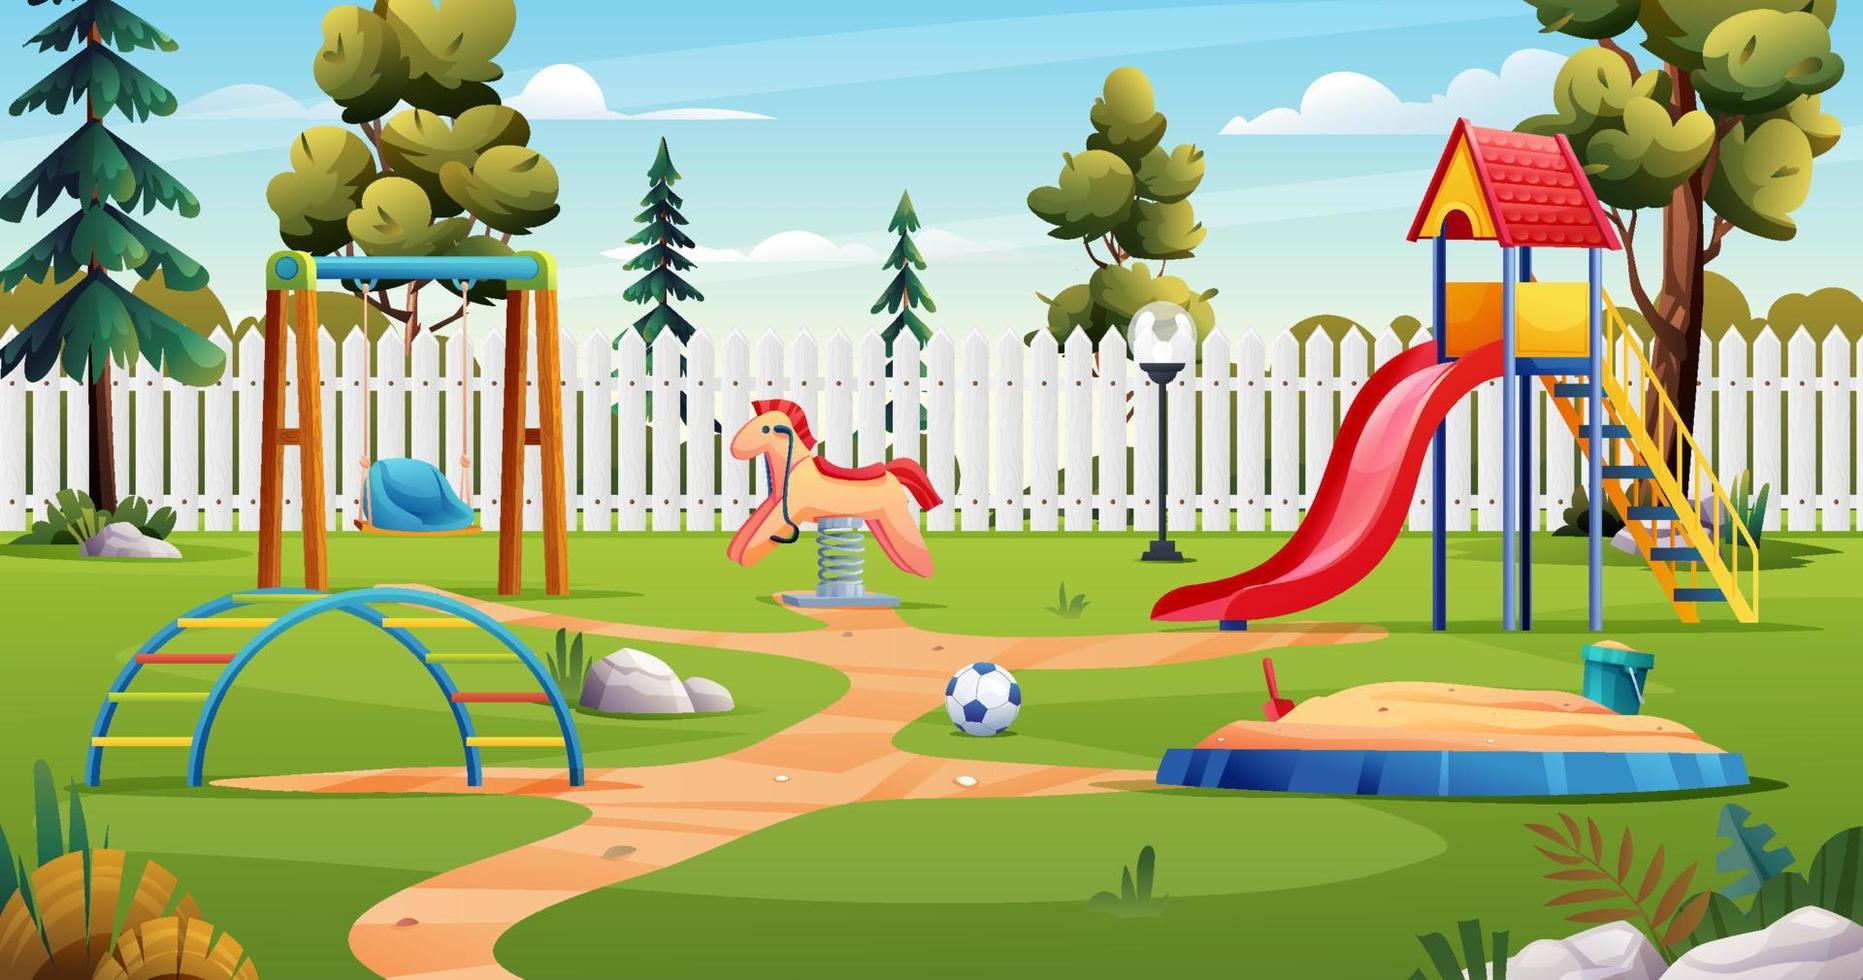 Kids playground with slide, swing, sandbox and toys cartoon landscape vector